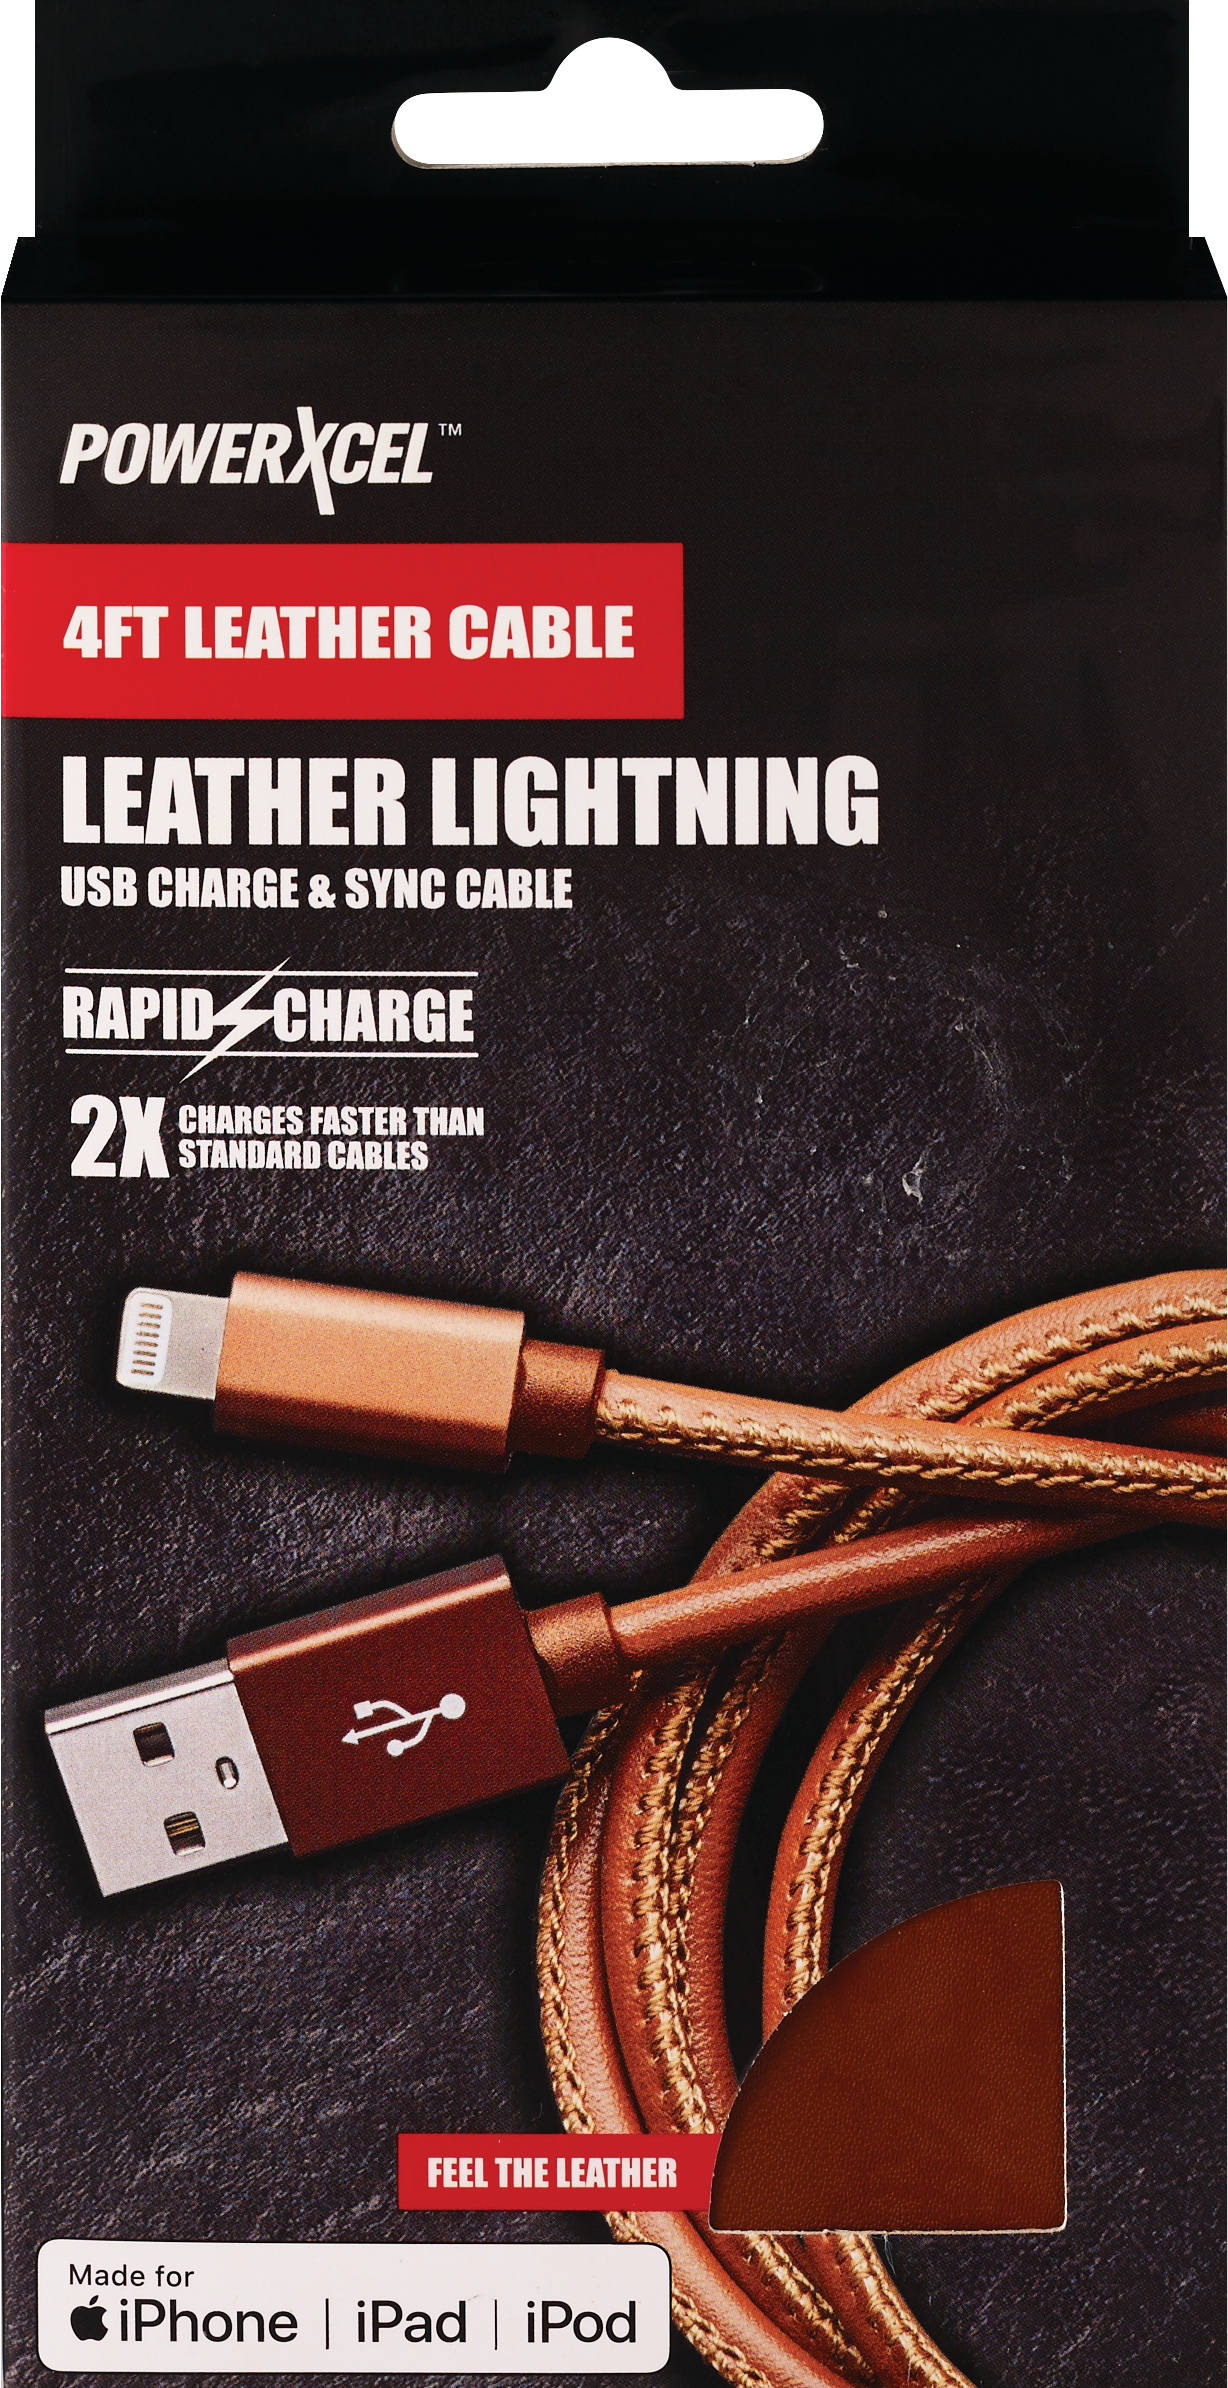 PowerXcel Lightning Leather Cable - Saddle Color